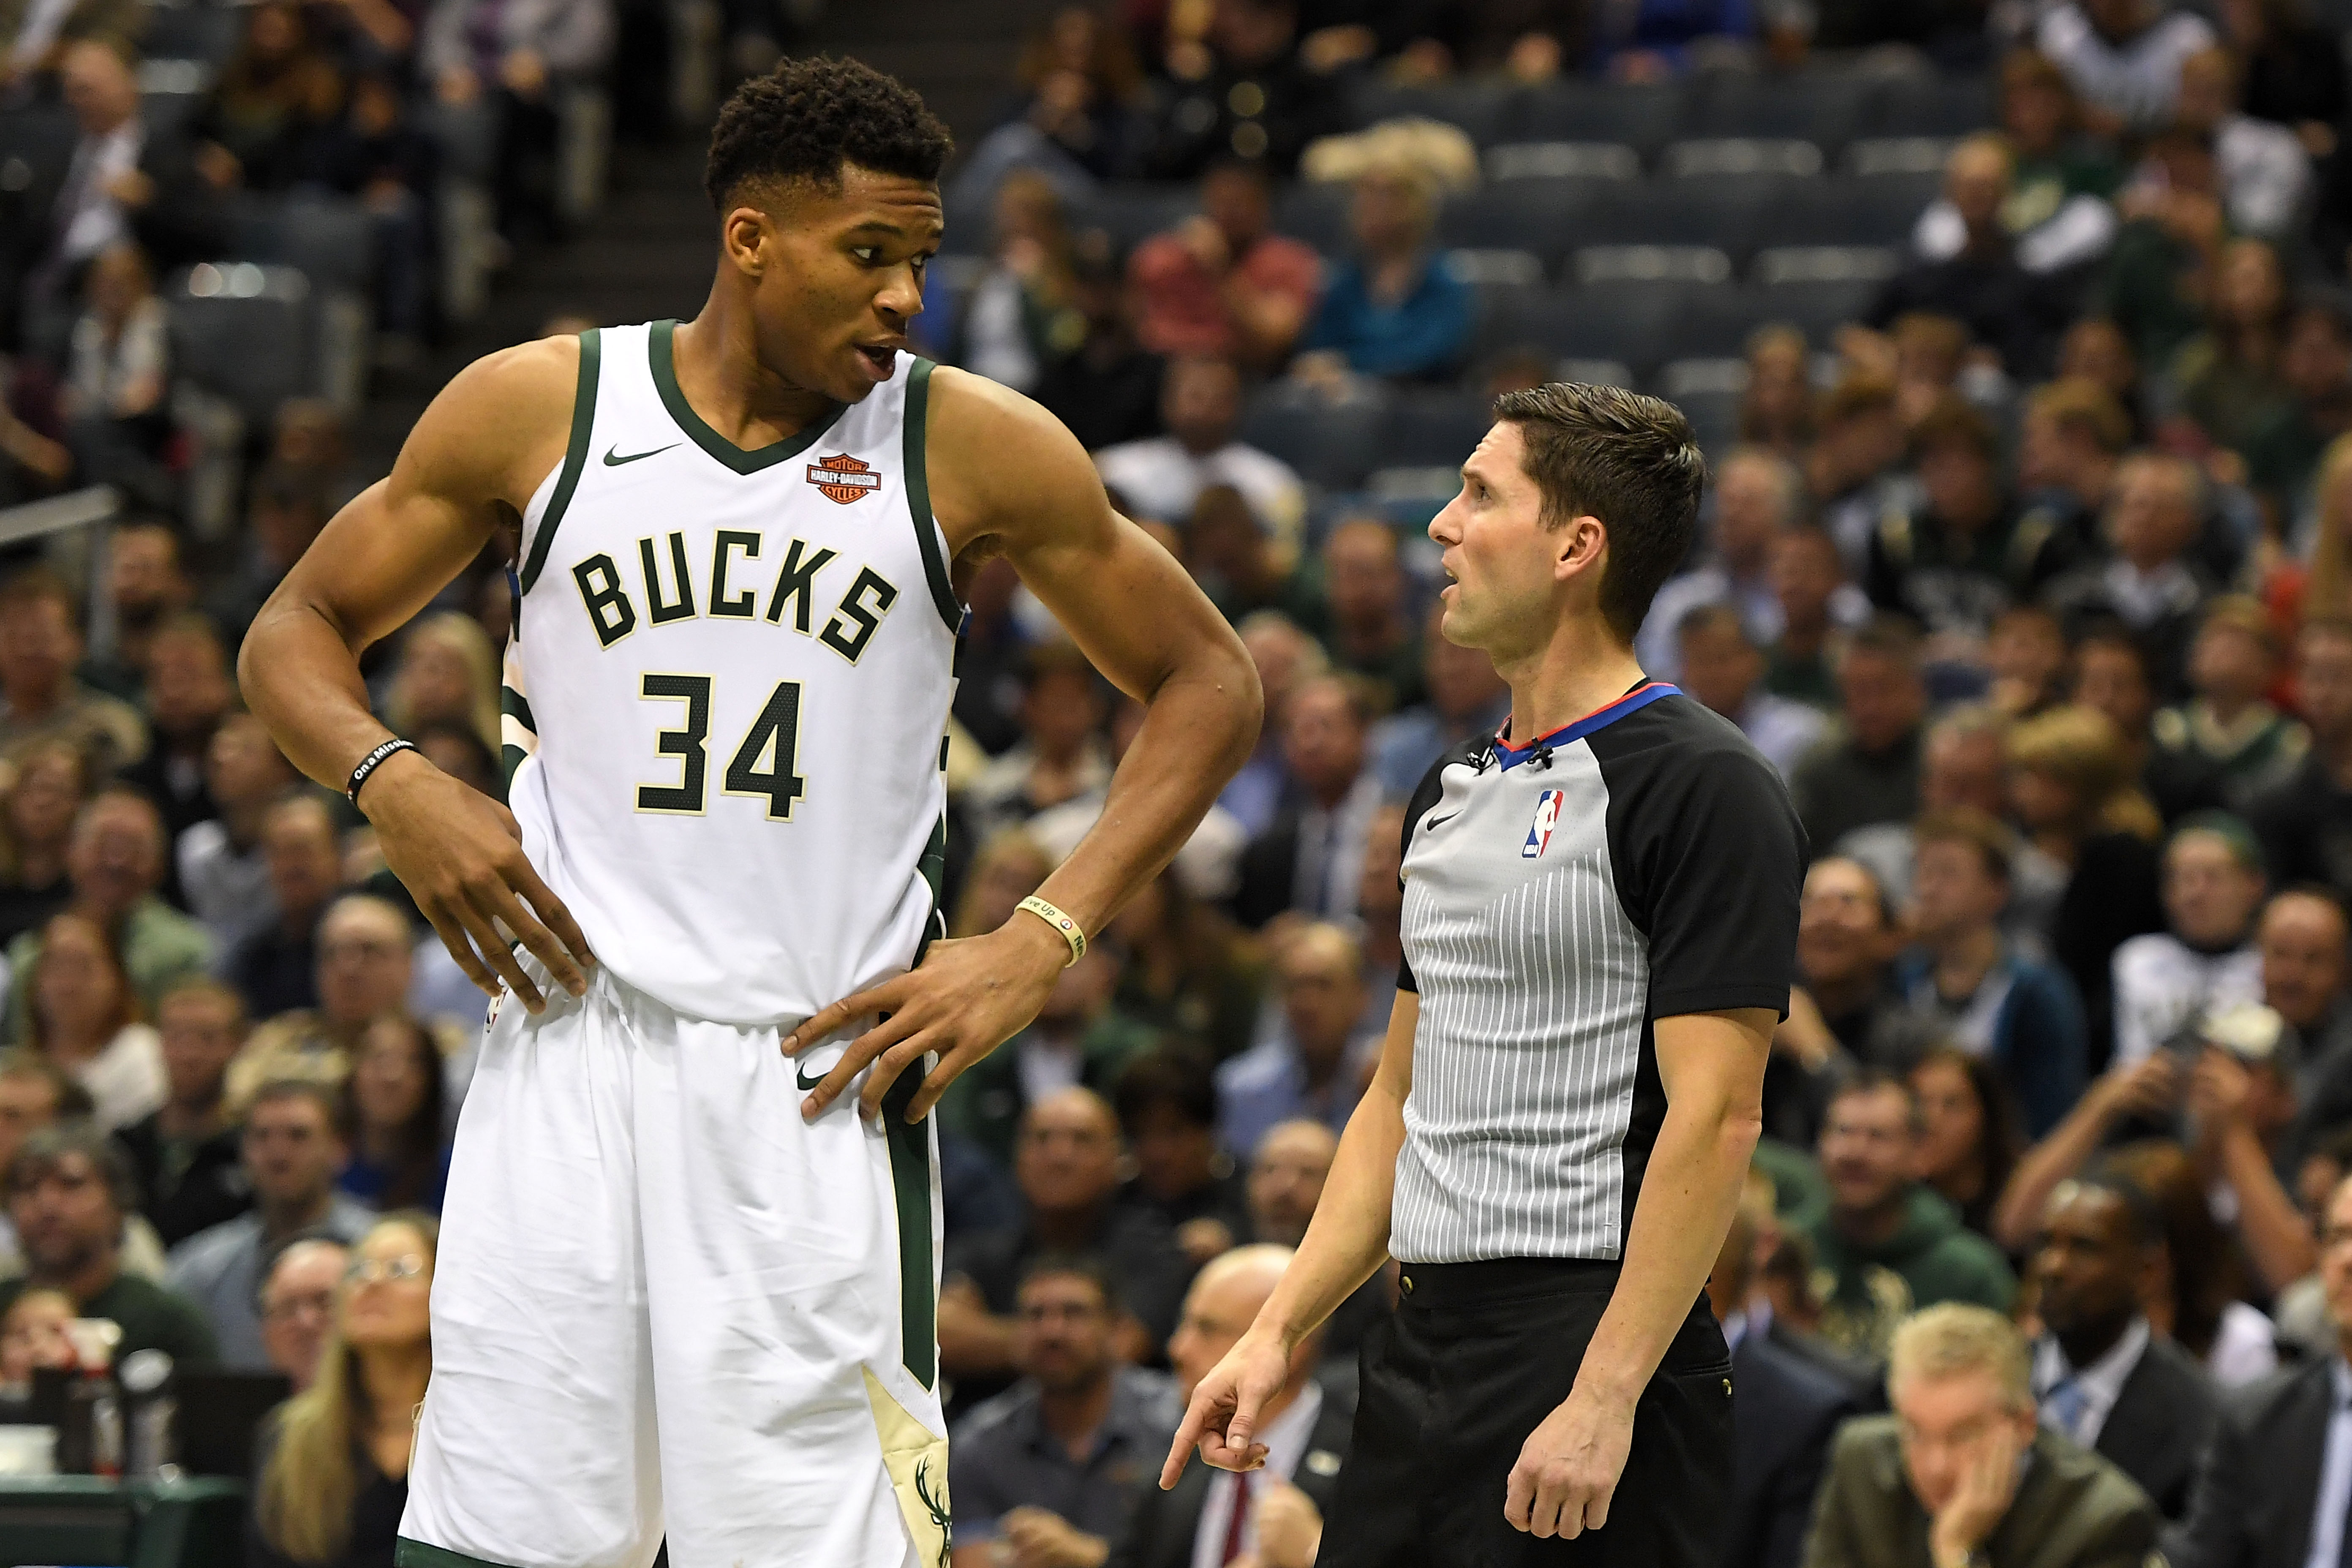 10 photos of Giannis Antetokounmpo looking like a superhero in games